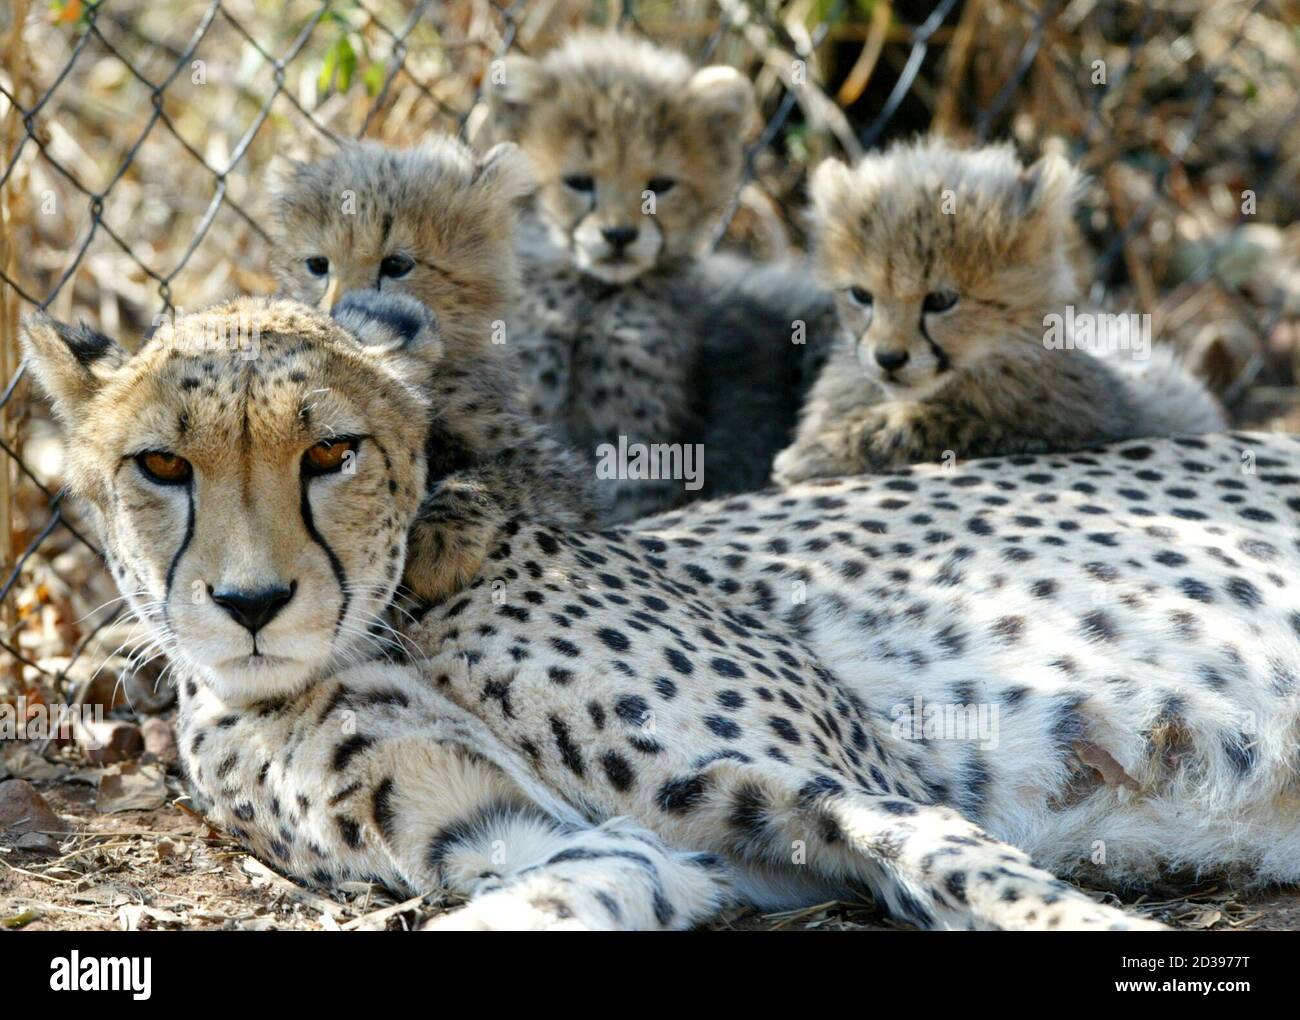 Page 3 - Wildt High Resolution Stock Photography and Images - Alamy